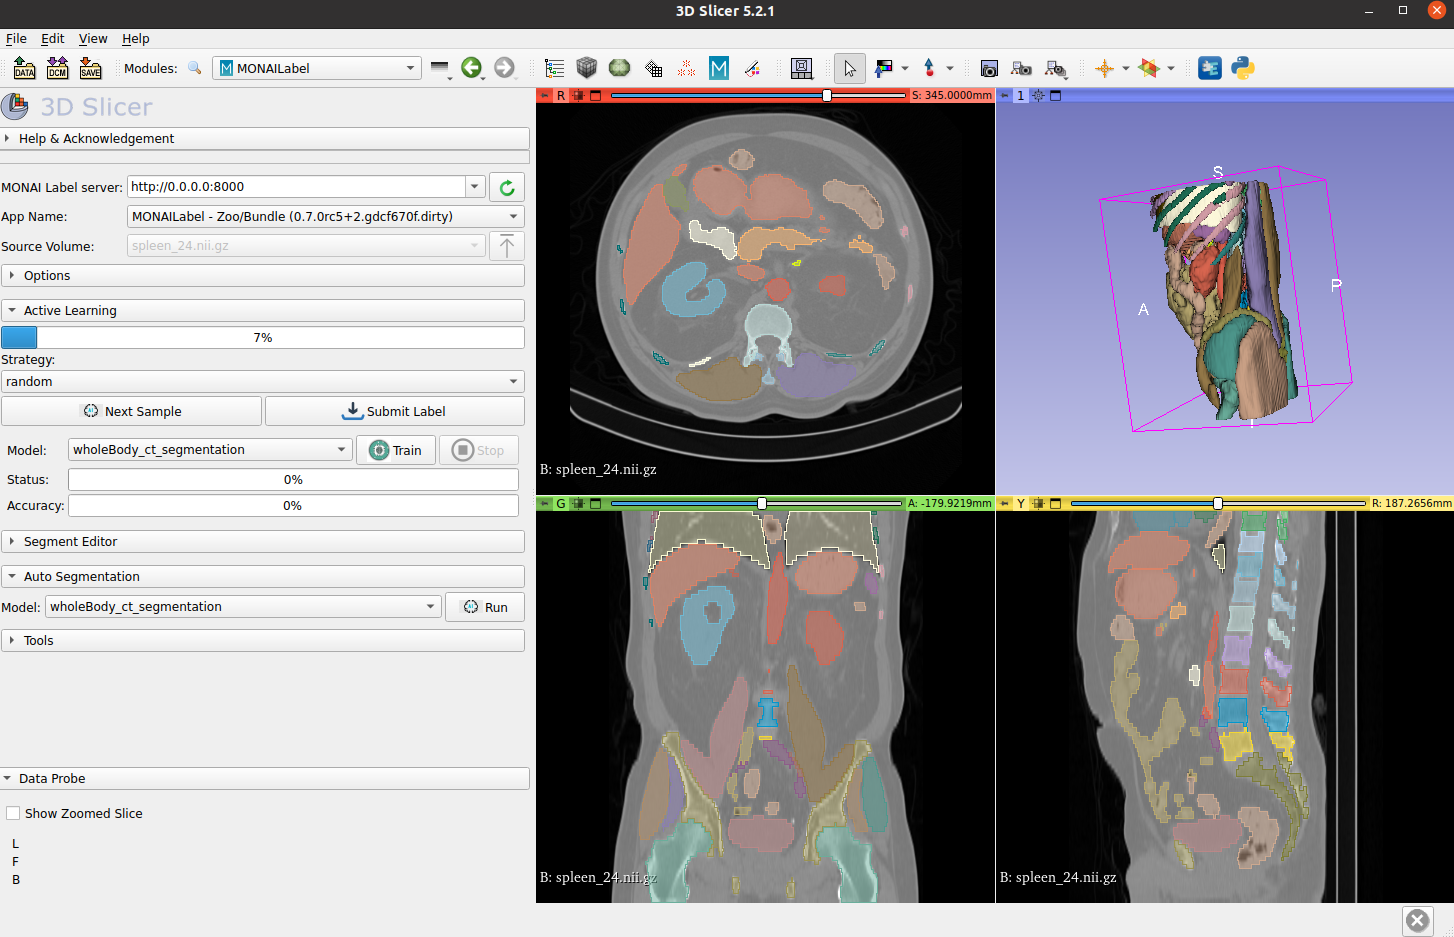 3D Slicer user interface showing segmentations of a torso from multiple angles.